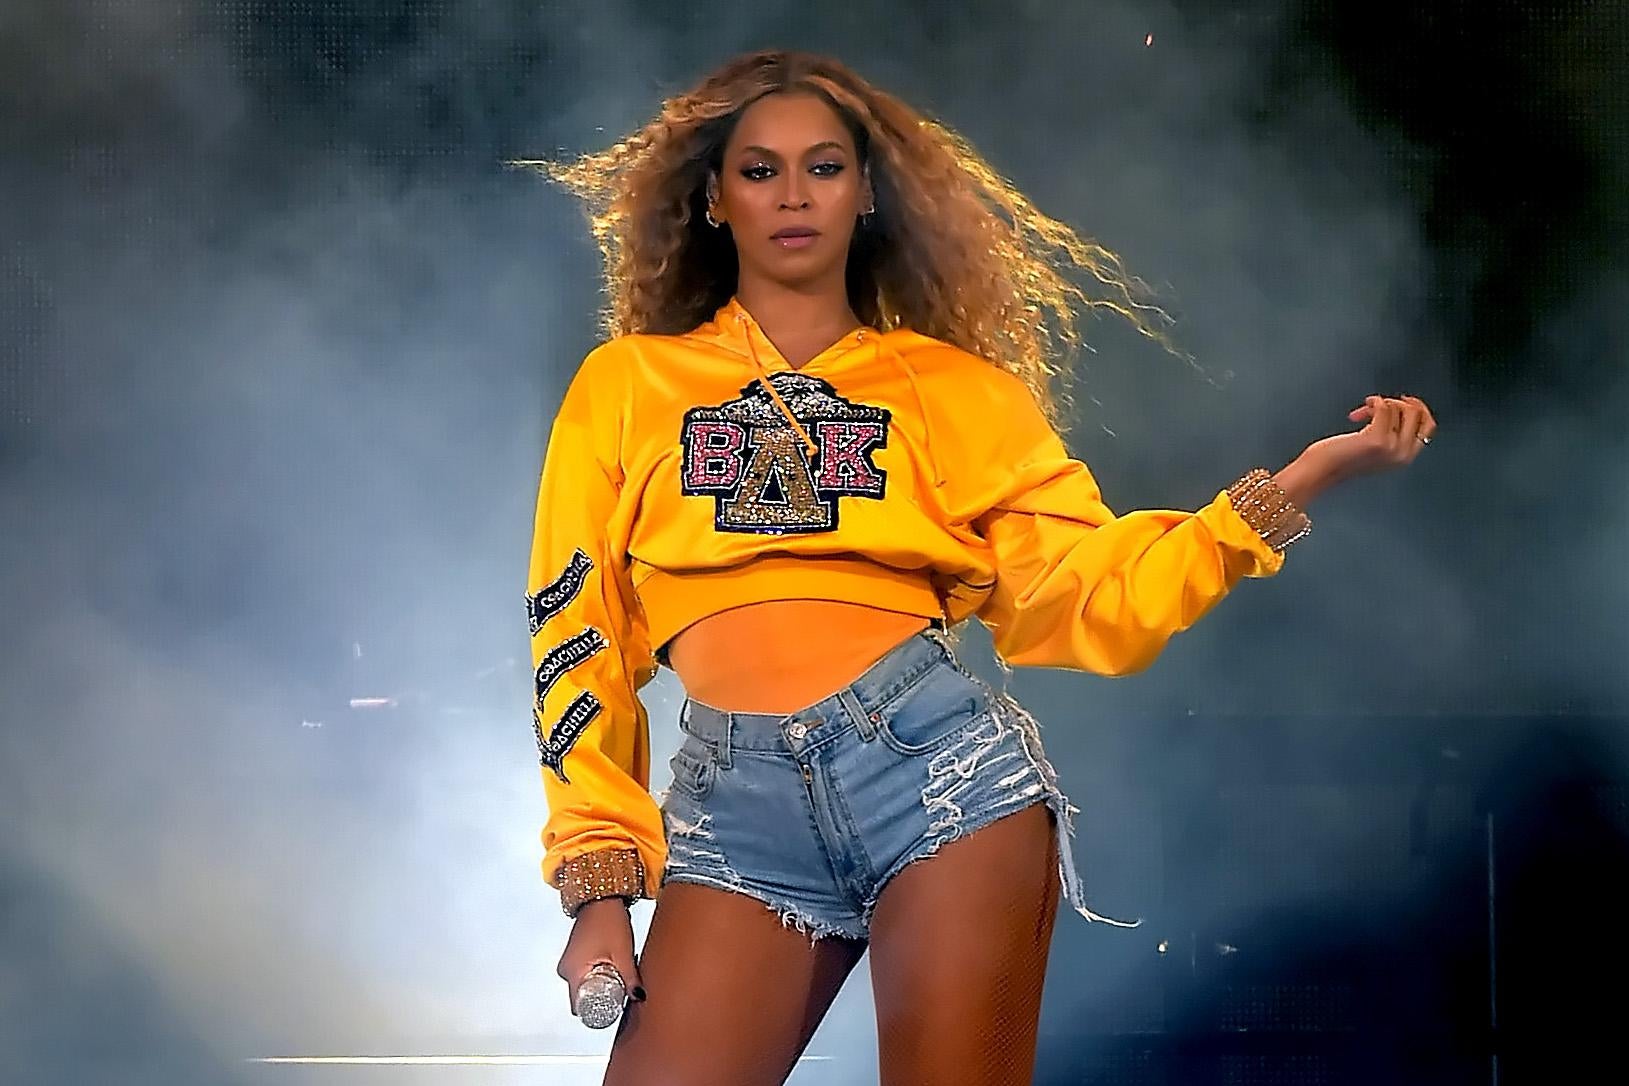 Beyonce Knowles performs onstage during Coachella 2018.